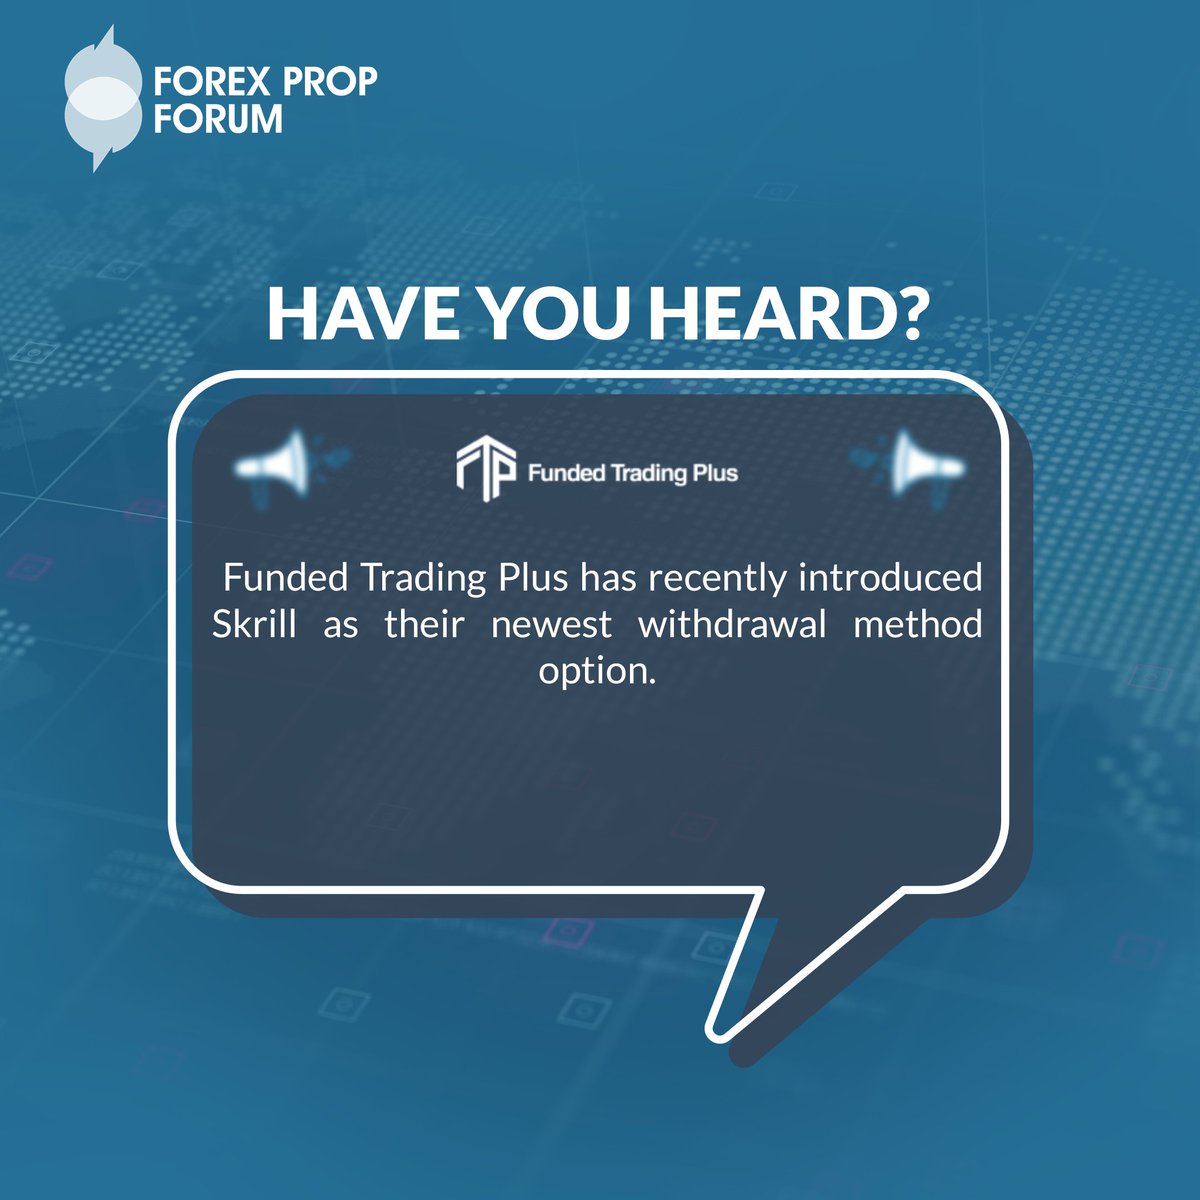 Have you heard?
Funded Trading Plus has recently introduced Skrill as their newest withdrawal method option.
#Skrill #Forex #HaveYouHeard #FundedTradingPlus